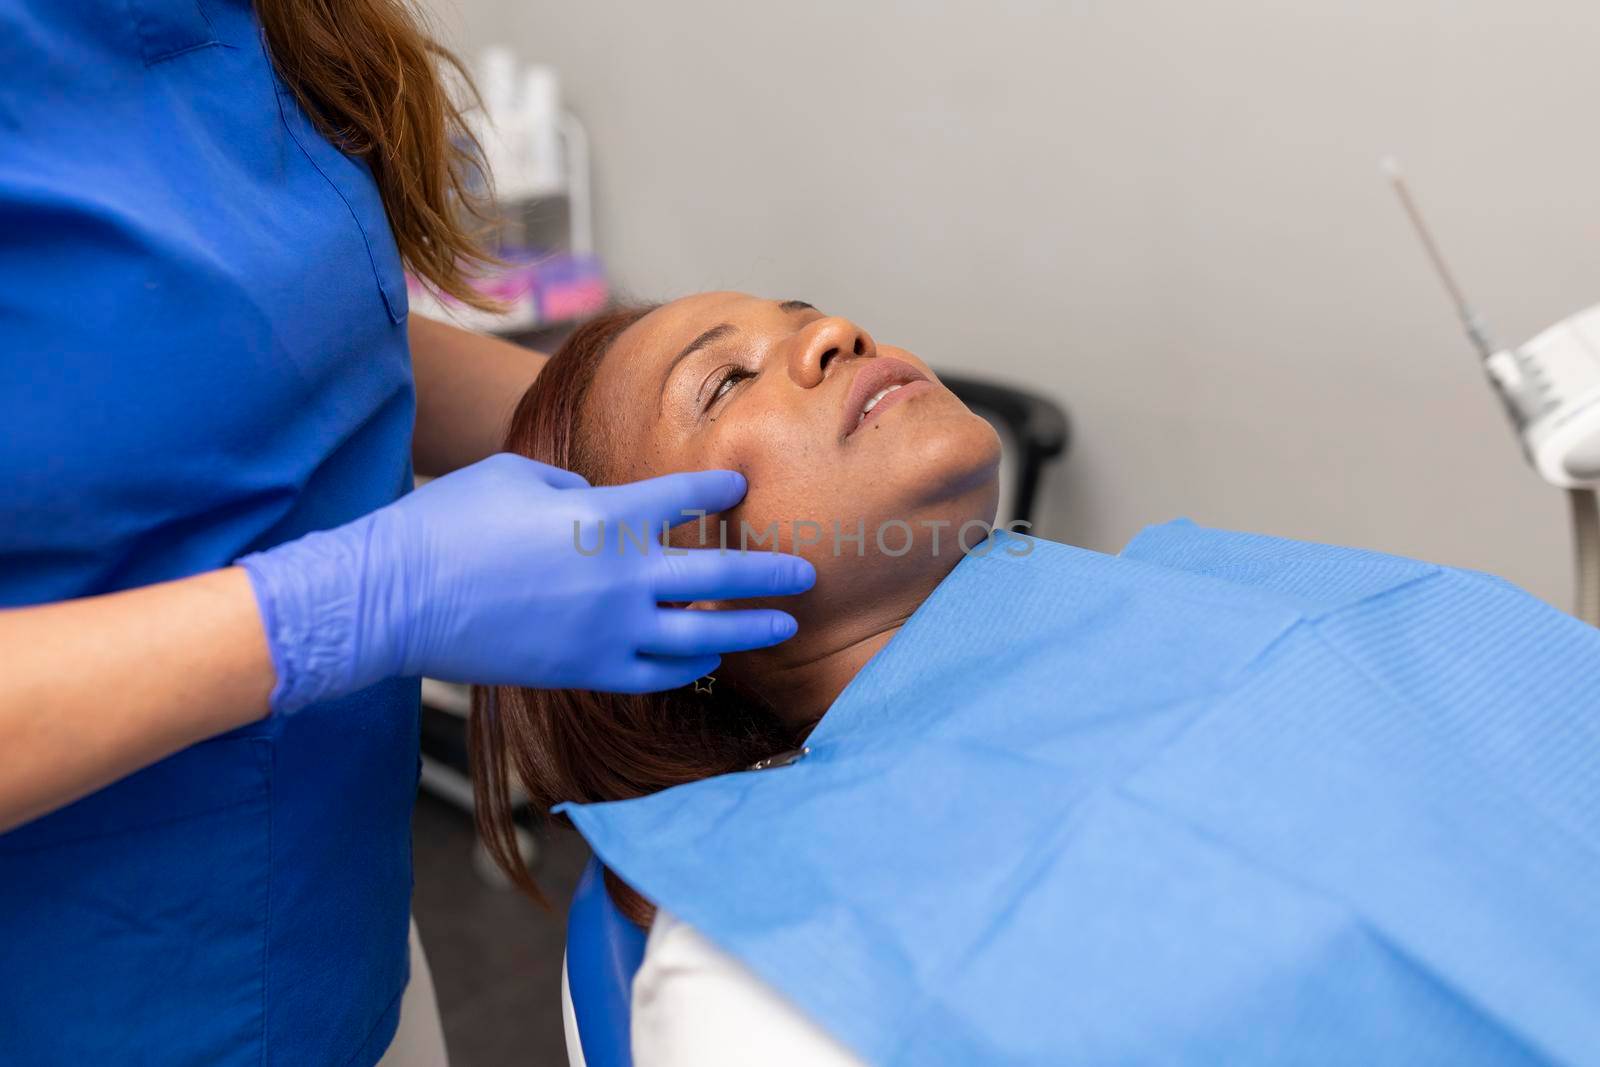 A black woman patient laying on the dental chair prior to be treated by stockrojoverdeyazul